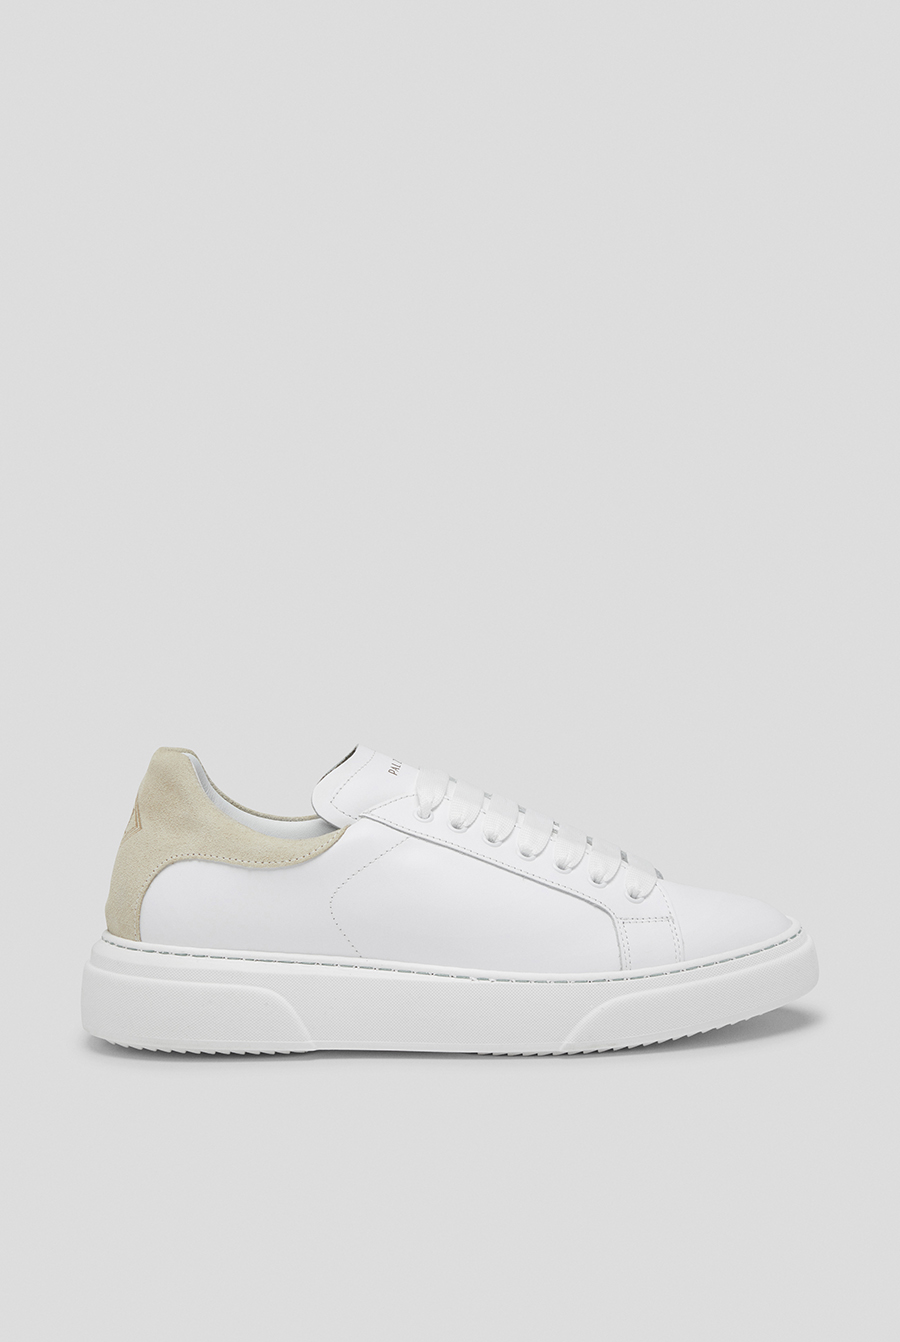 Sneakers in leather and suede with thick sole WHITE Pal Zileri | Shop ...